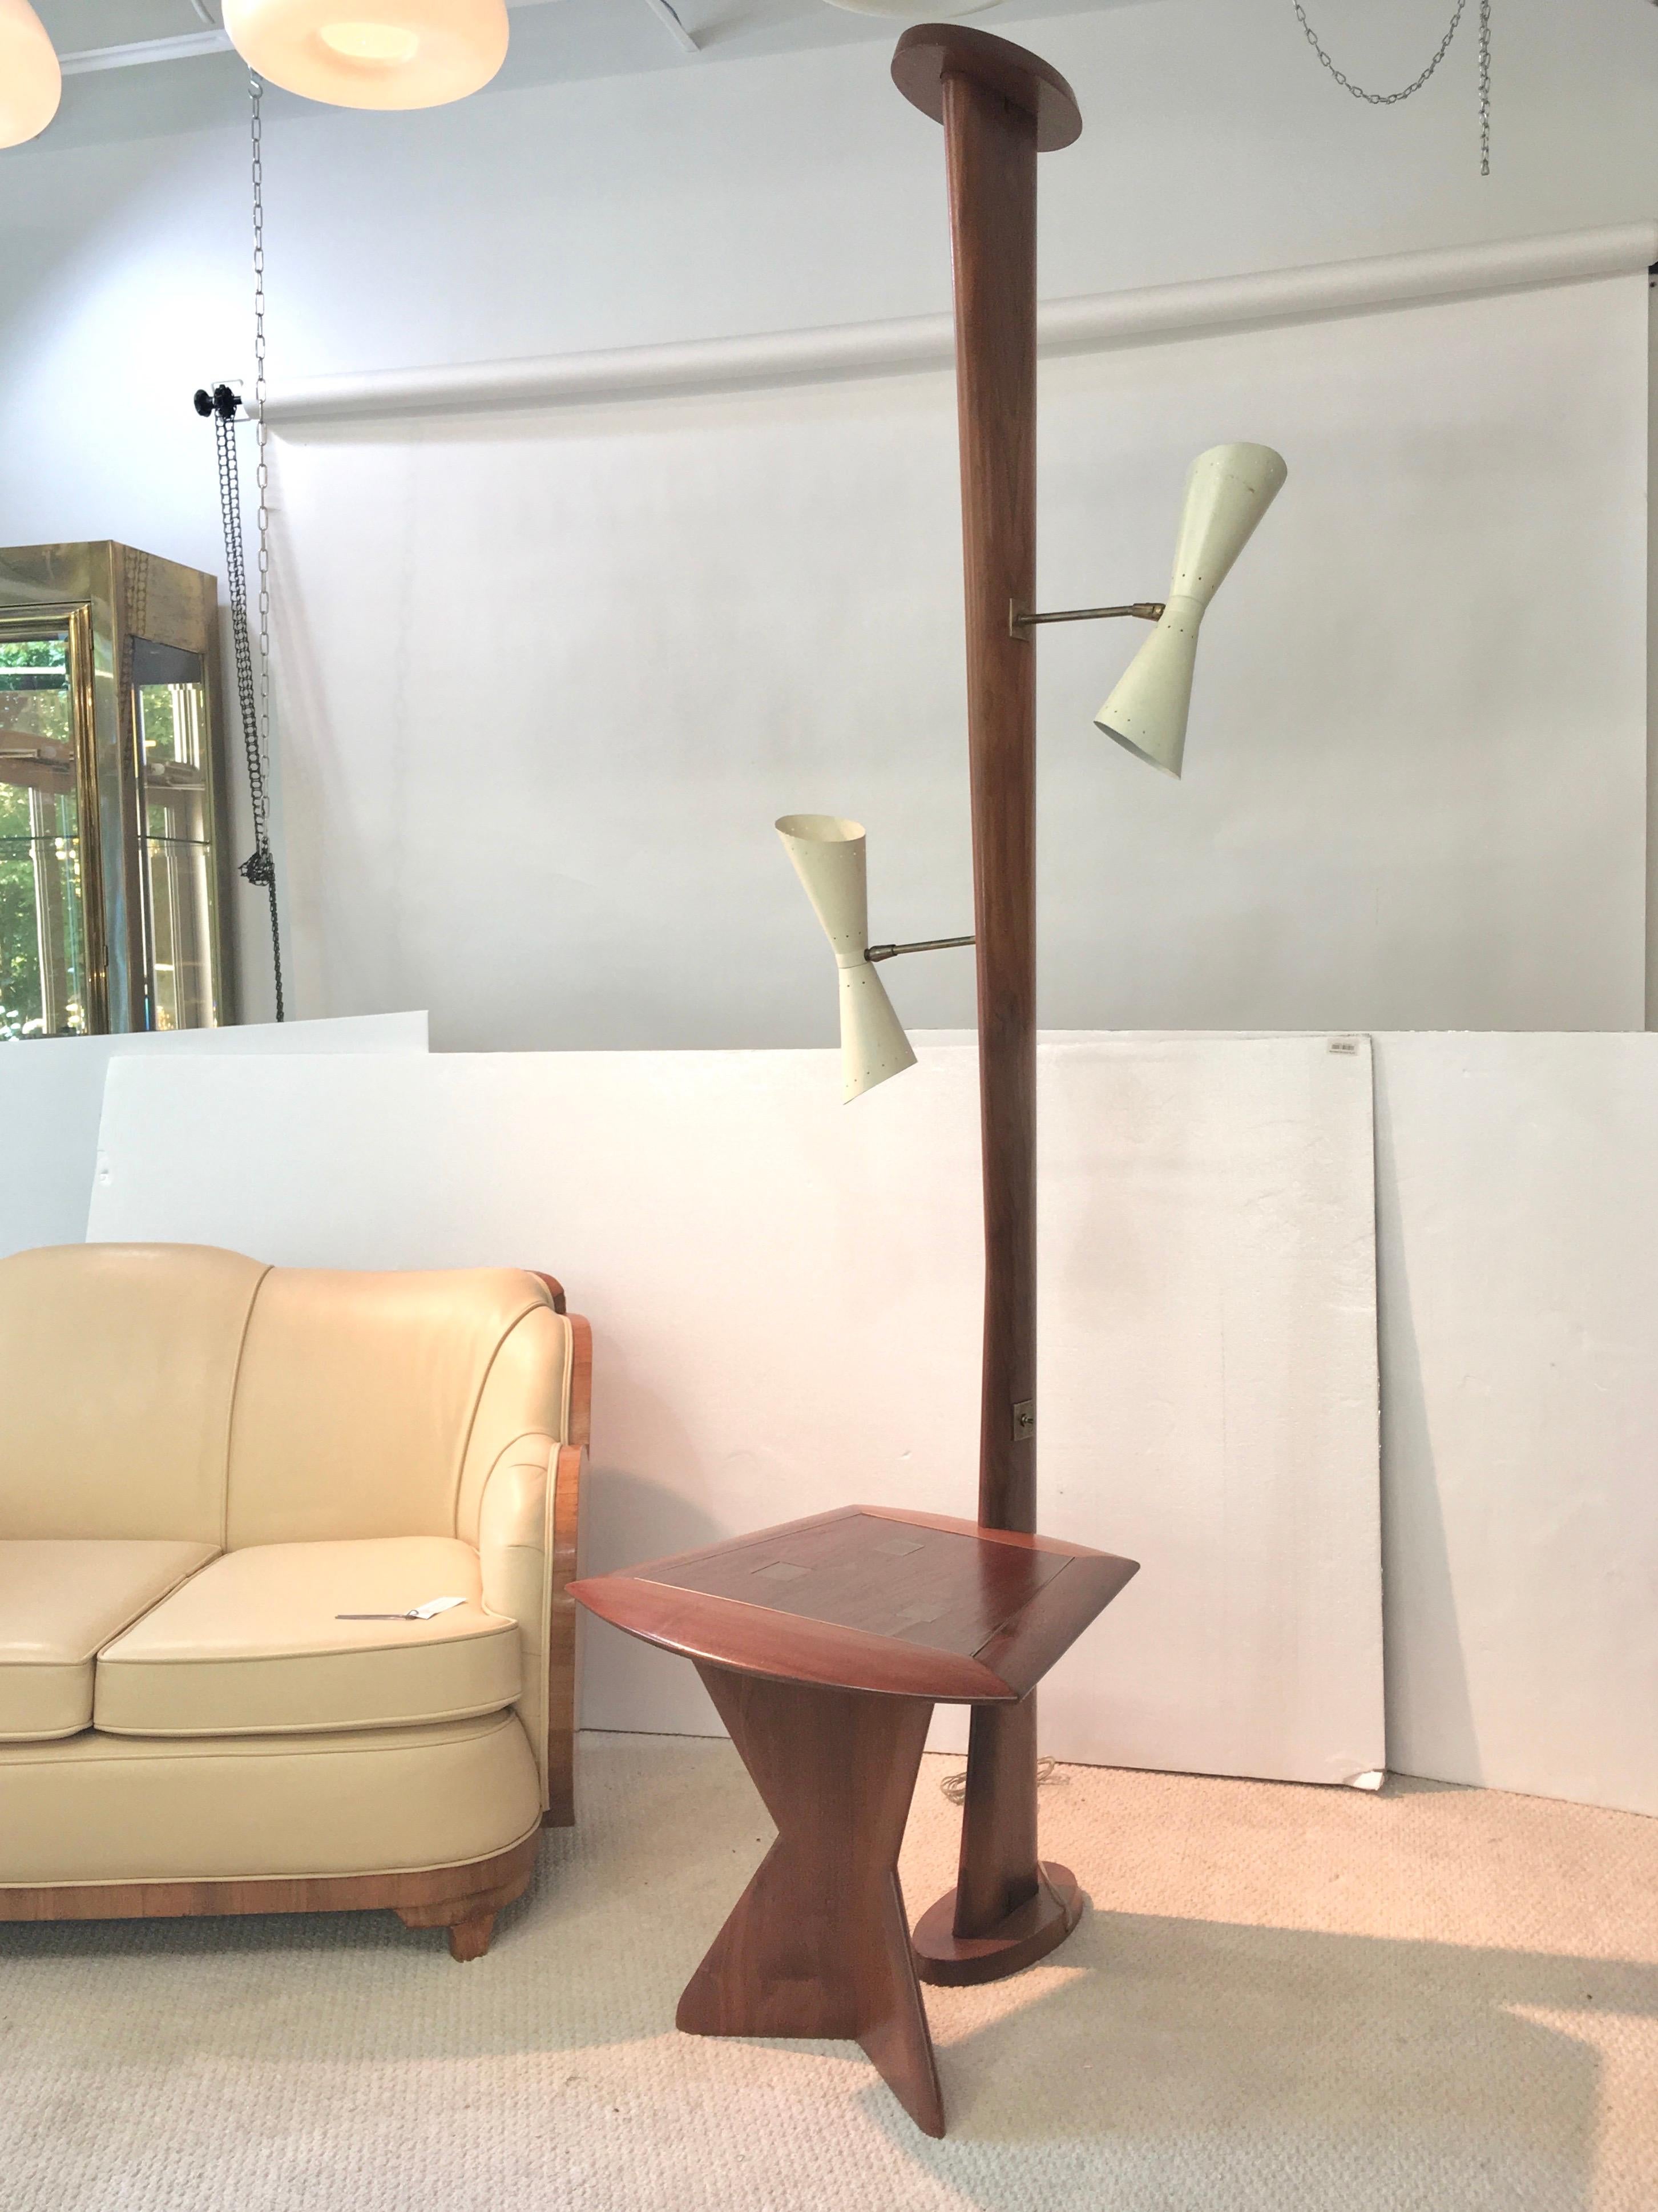 Custom-made very grand scale (at 7 feet 6 inches tall) and sculptural walnut wood floor lamp with integrated side table from the Flushing, NY studios of Samson Berman Associates, circa 1956.
Organic woodcraft with foil edges like on an airplane wing